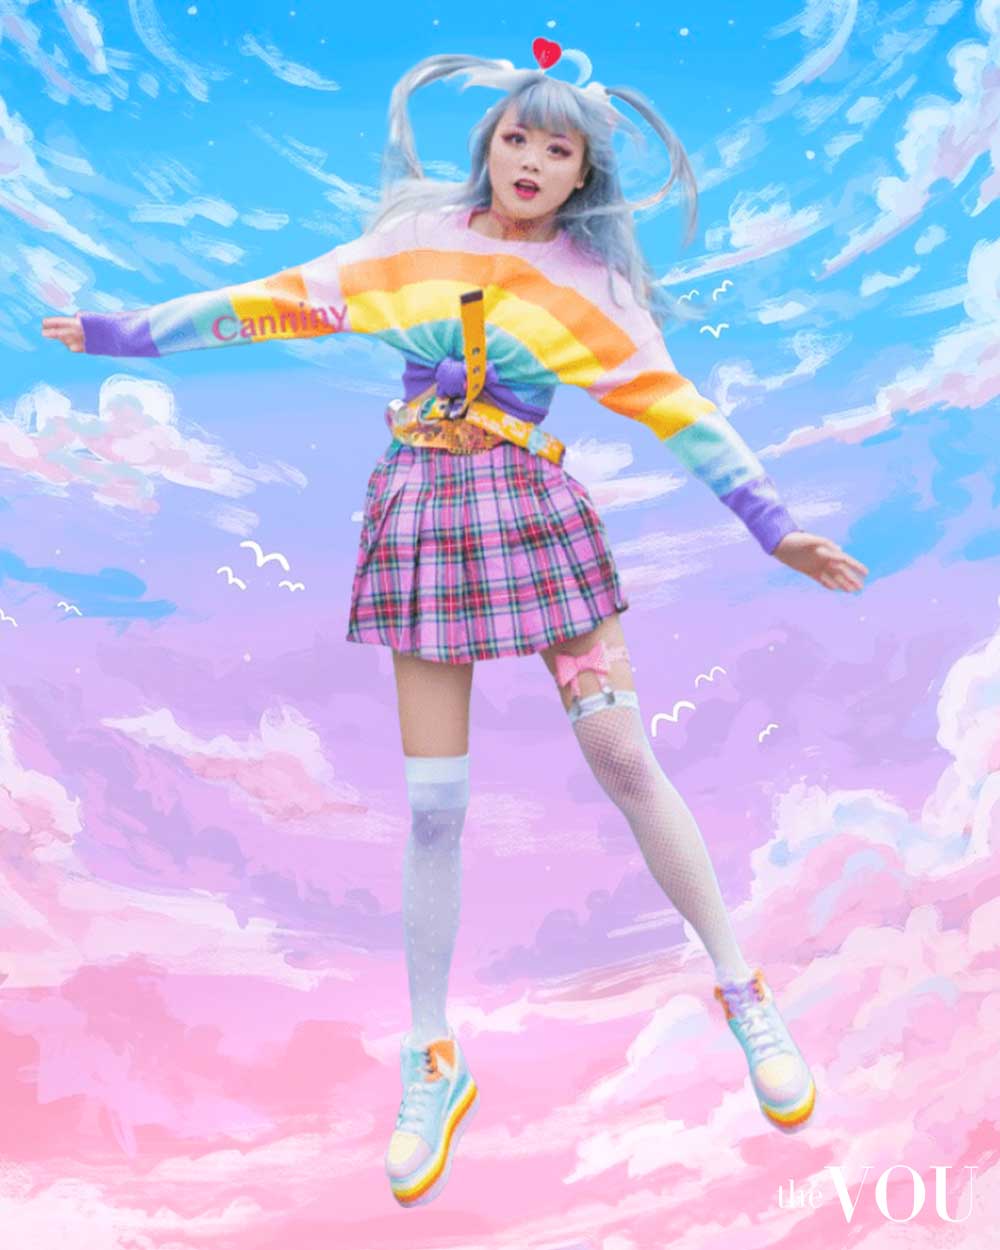 Candy Clouds Dreamcore Sweater, Pink Pleated Mini Skirts, and Rainbow Platforms